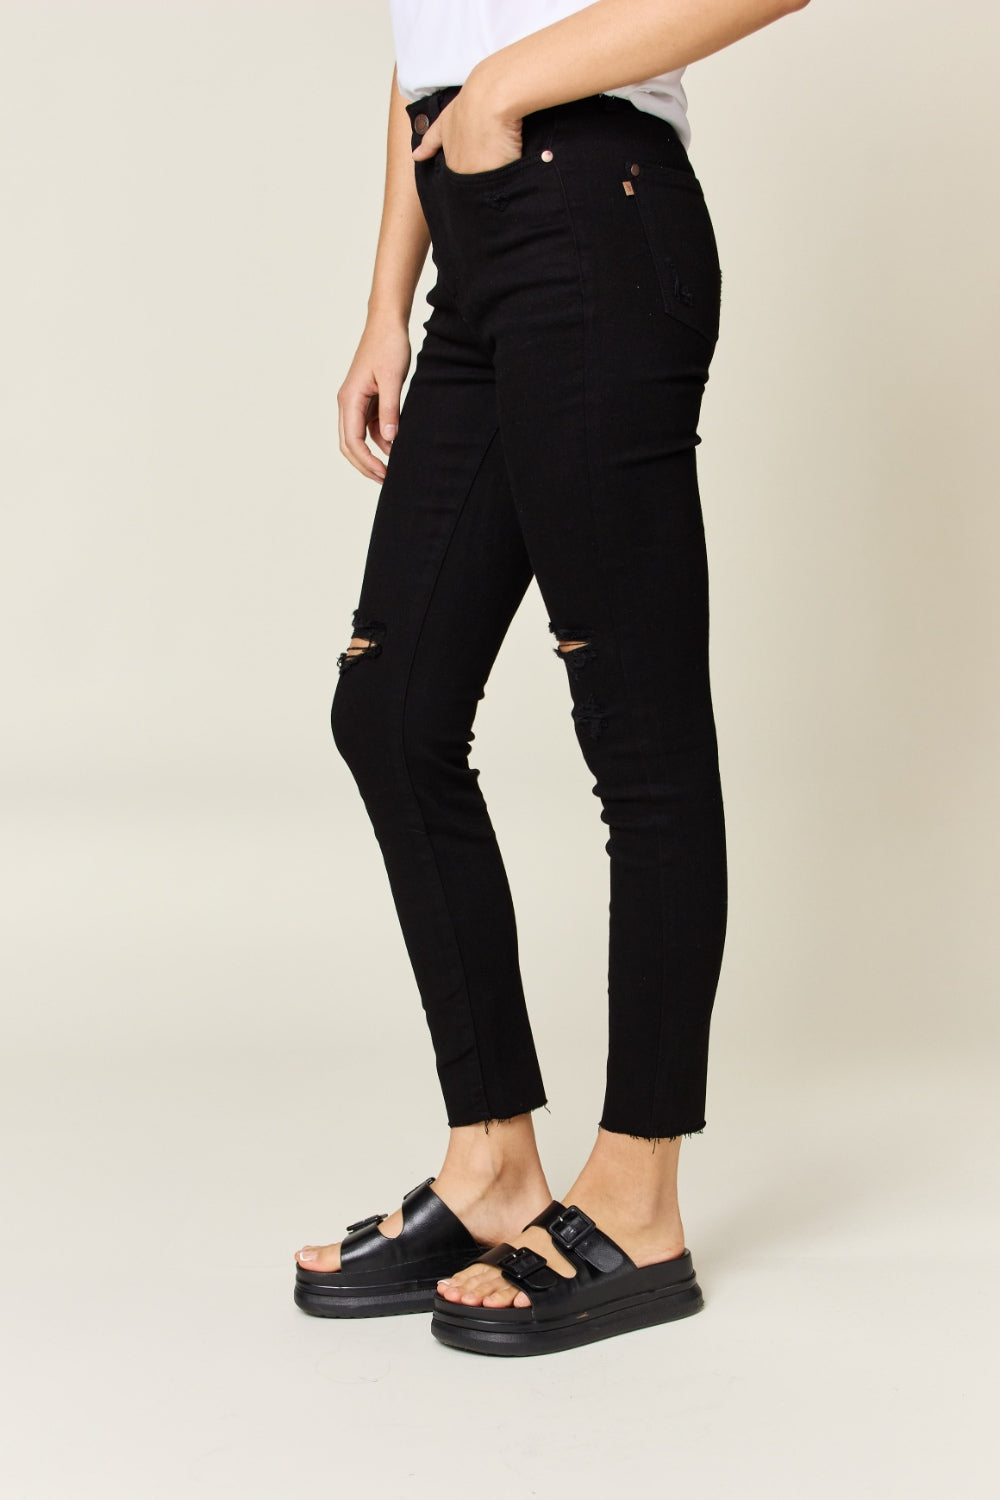 Judy Blue Distressed Tummy Control High Waist Skinny Jeans - Mulberry Skies